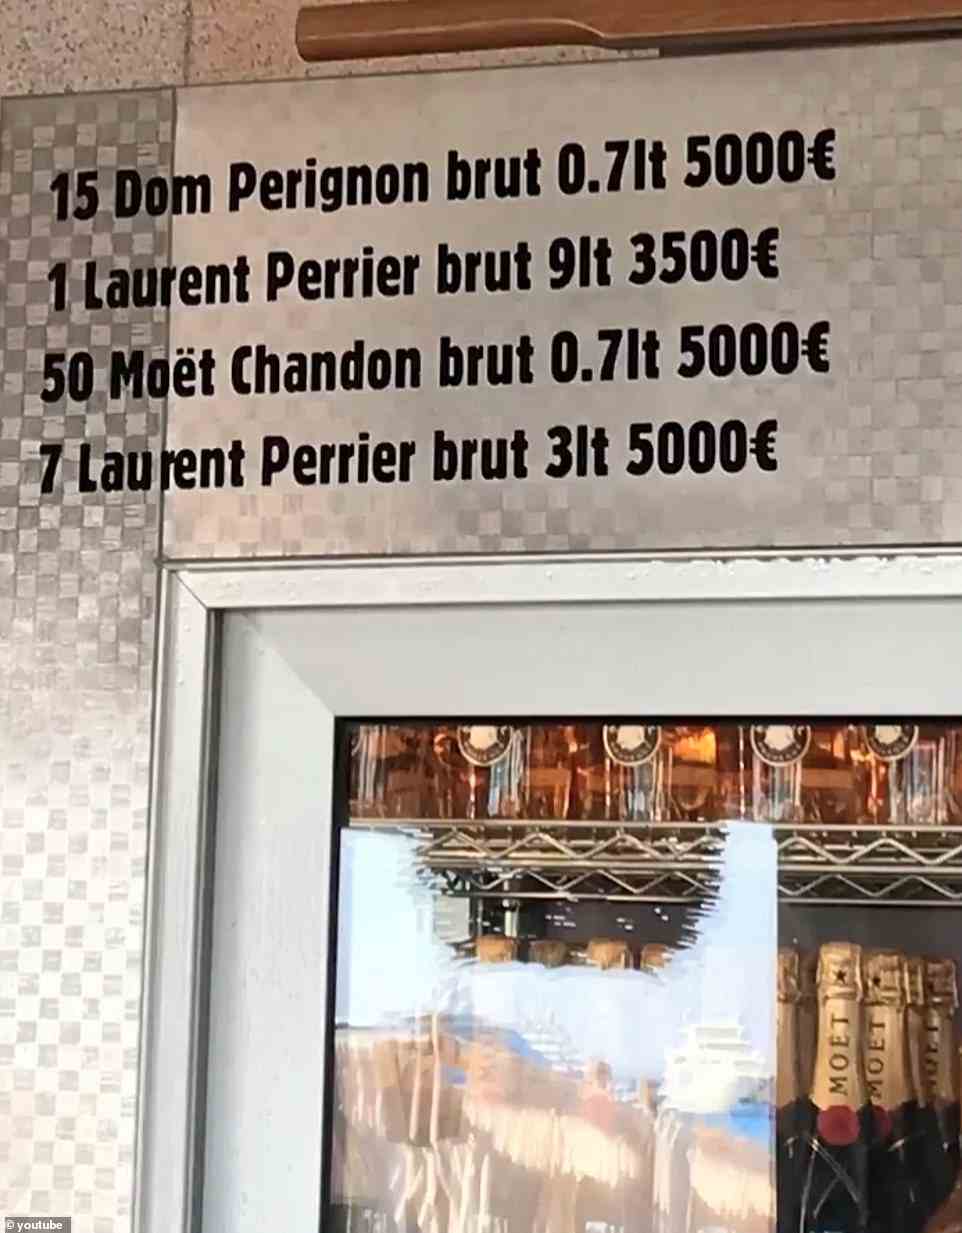 Prices for bottles of champagne are displayed on refrigerator inside the restaurant